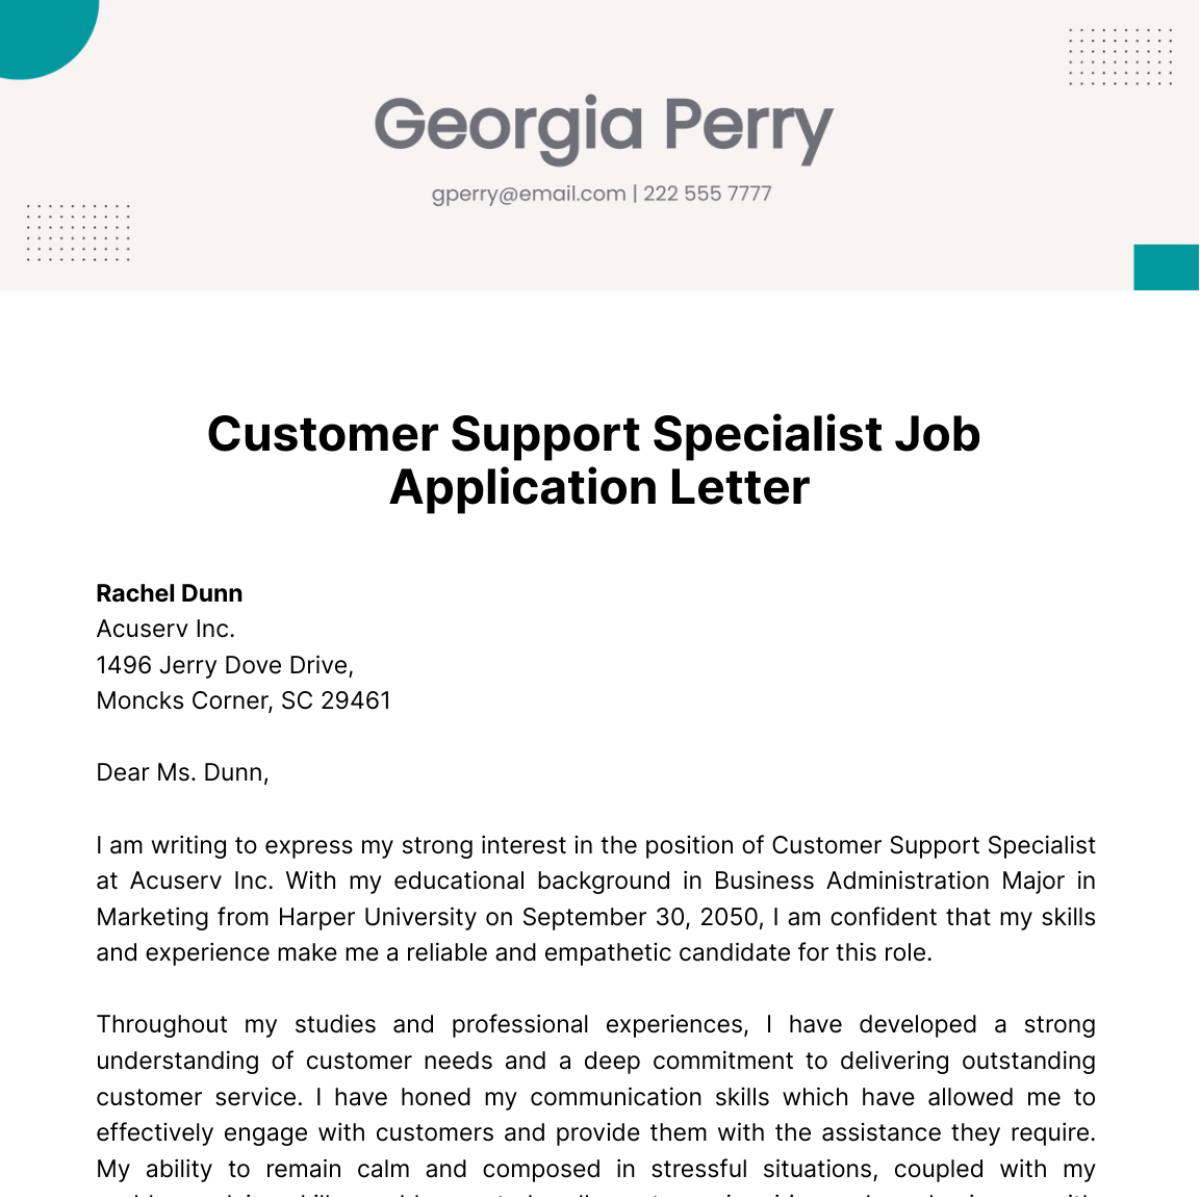 Customer Support Specialist Job Application Letter  Template